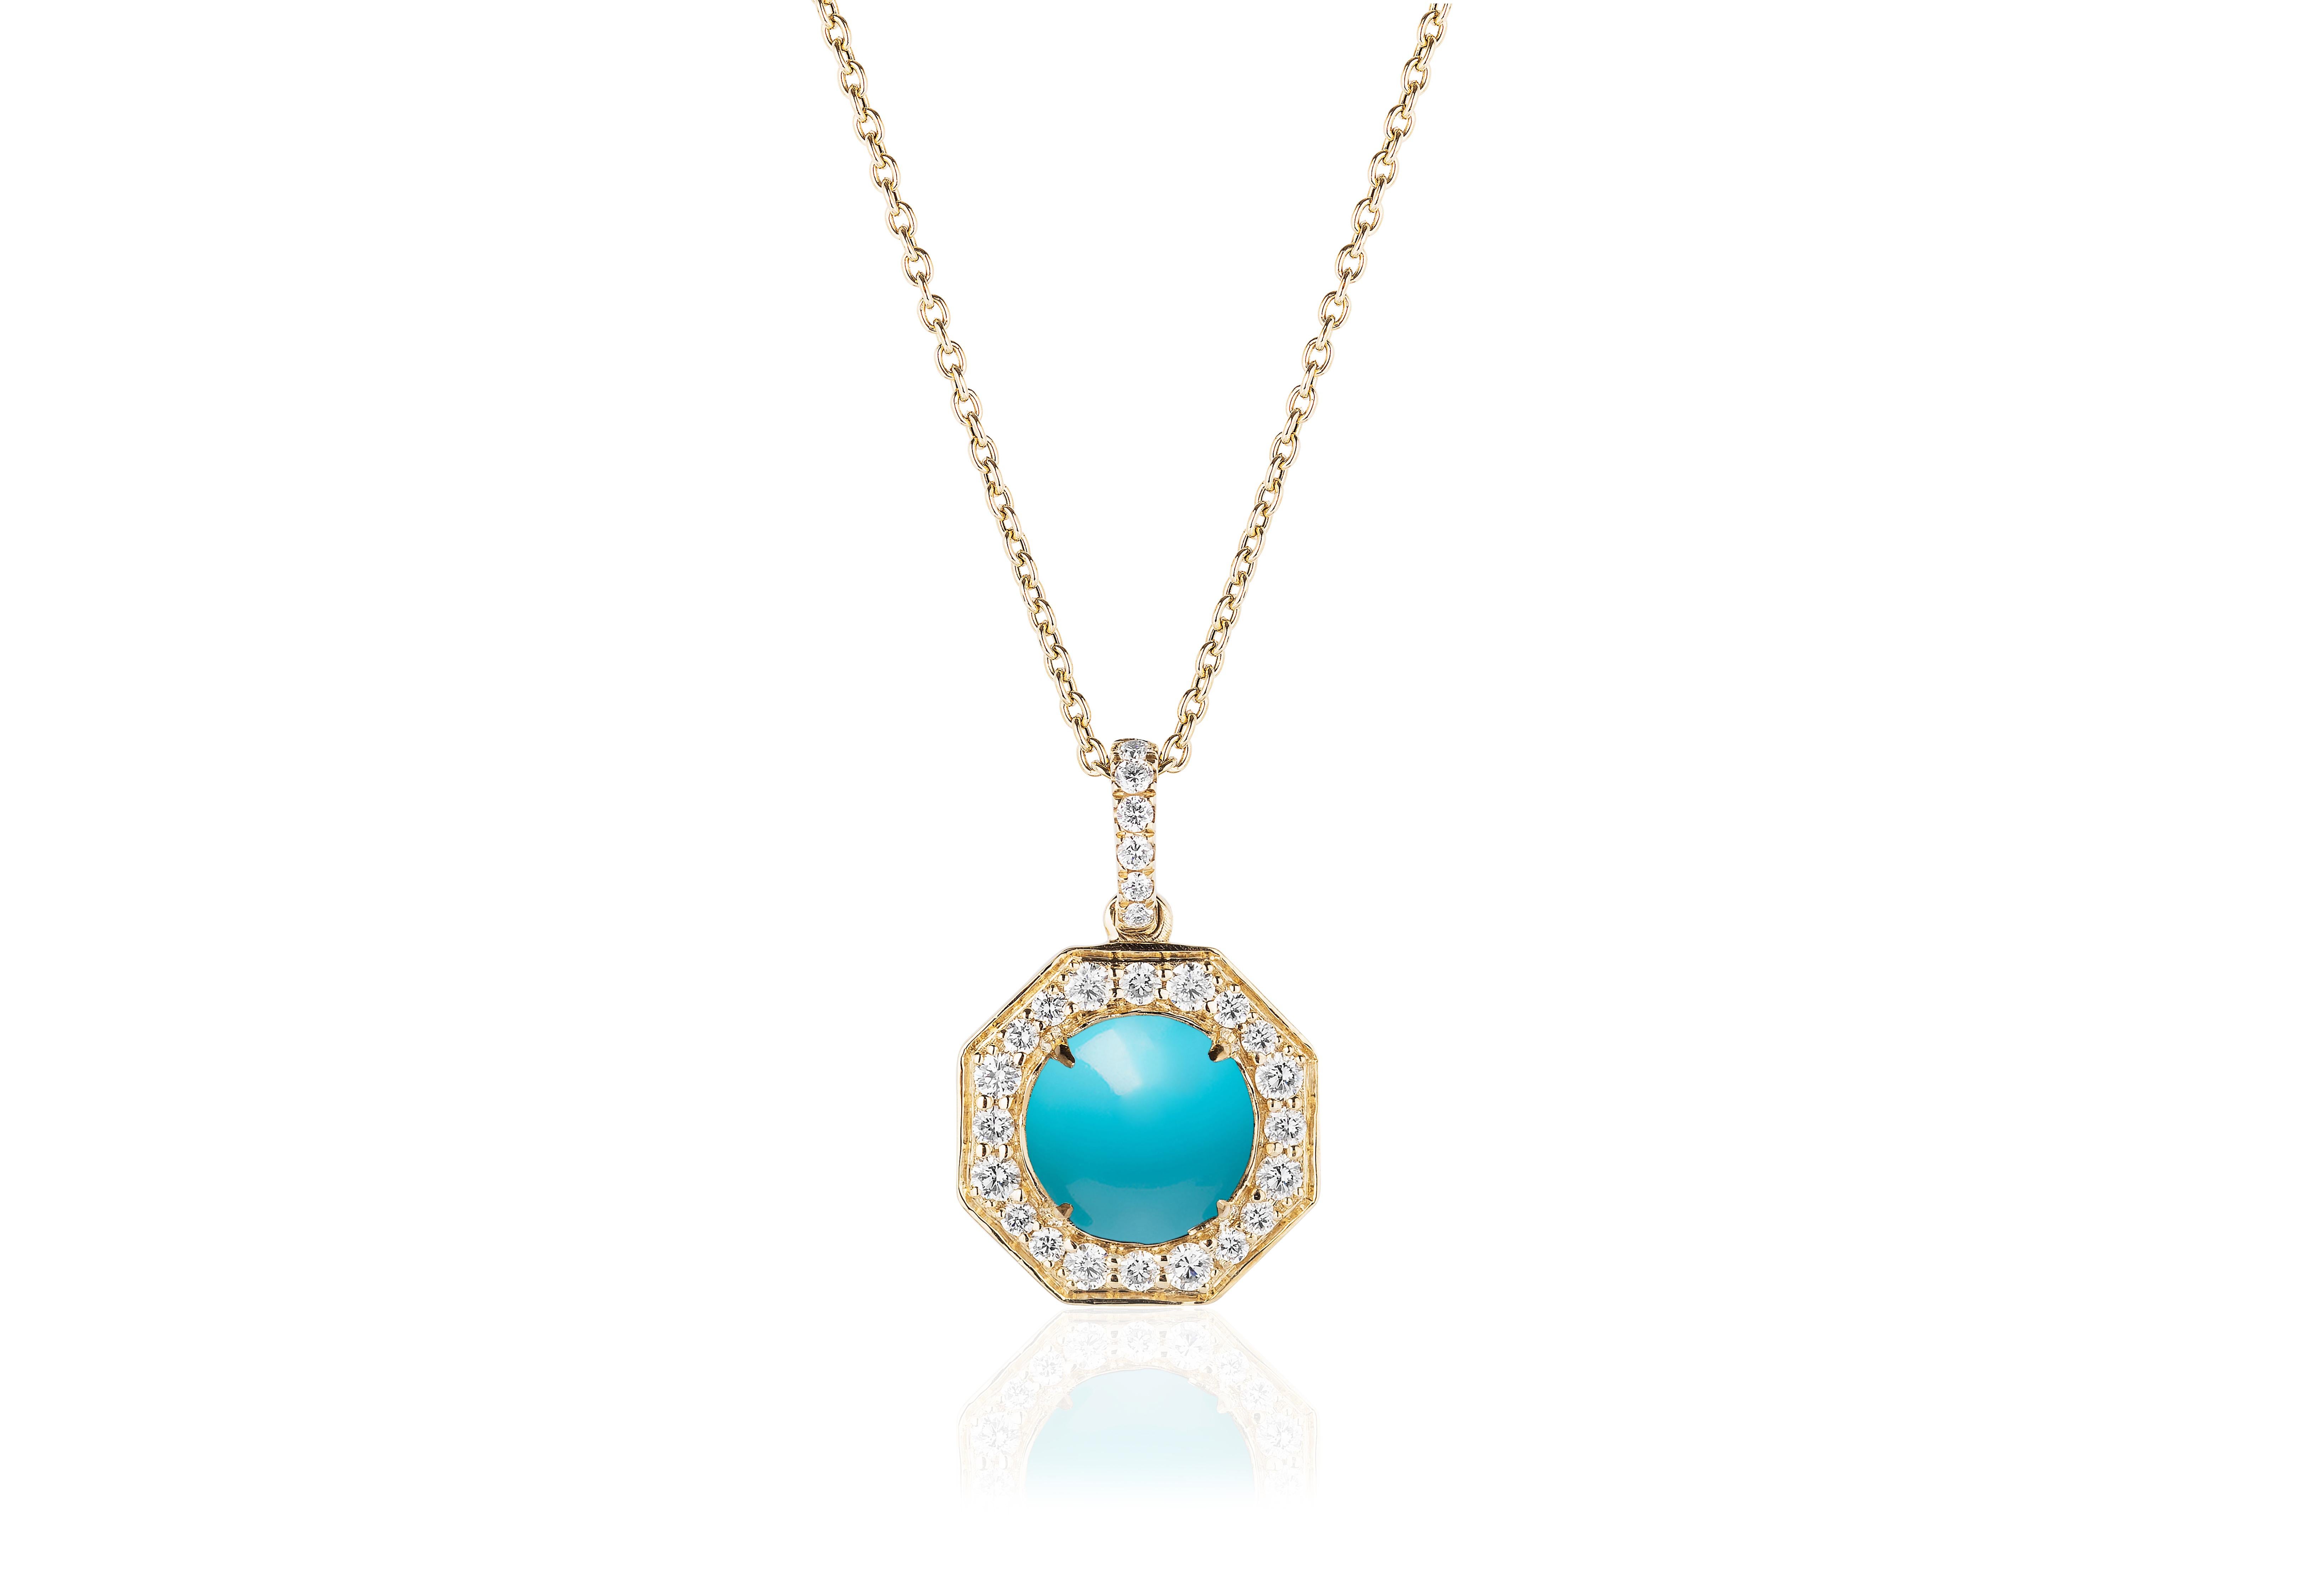 Turquoise Small Pendant with Diamonds in 18k Yellow Gold, from 'Rock N Roll' Collection

Stone Size: 8 mm 

Gemstone Weight:  Turquoise- 1.26 Carats

Diamond: G-H / VS, Approx Wt: 0.36 Carats